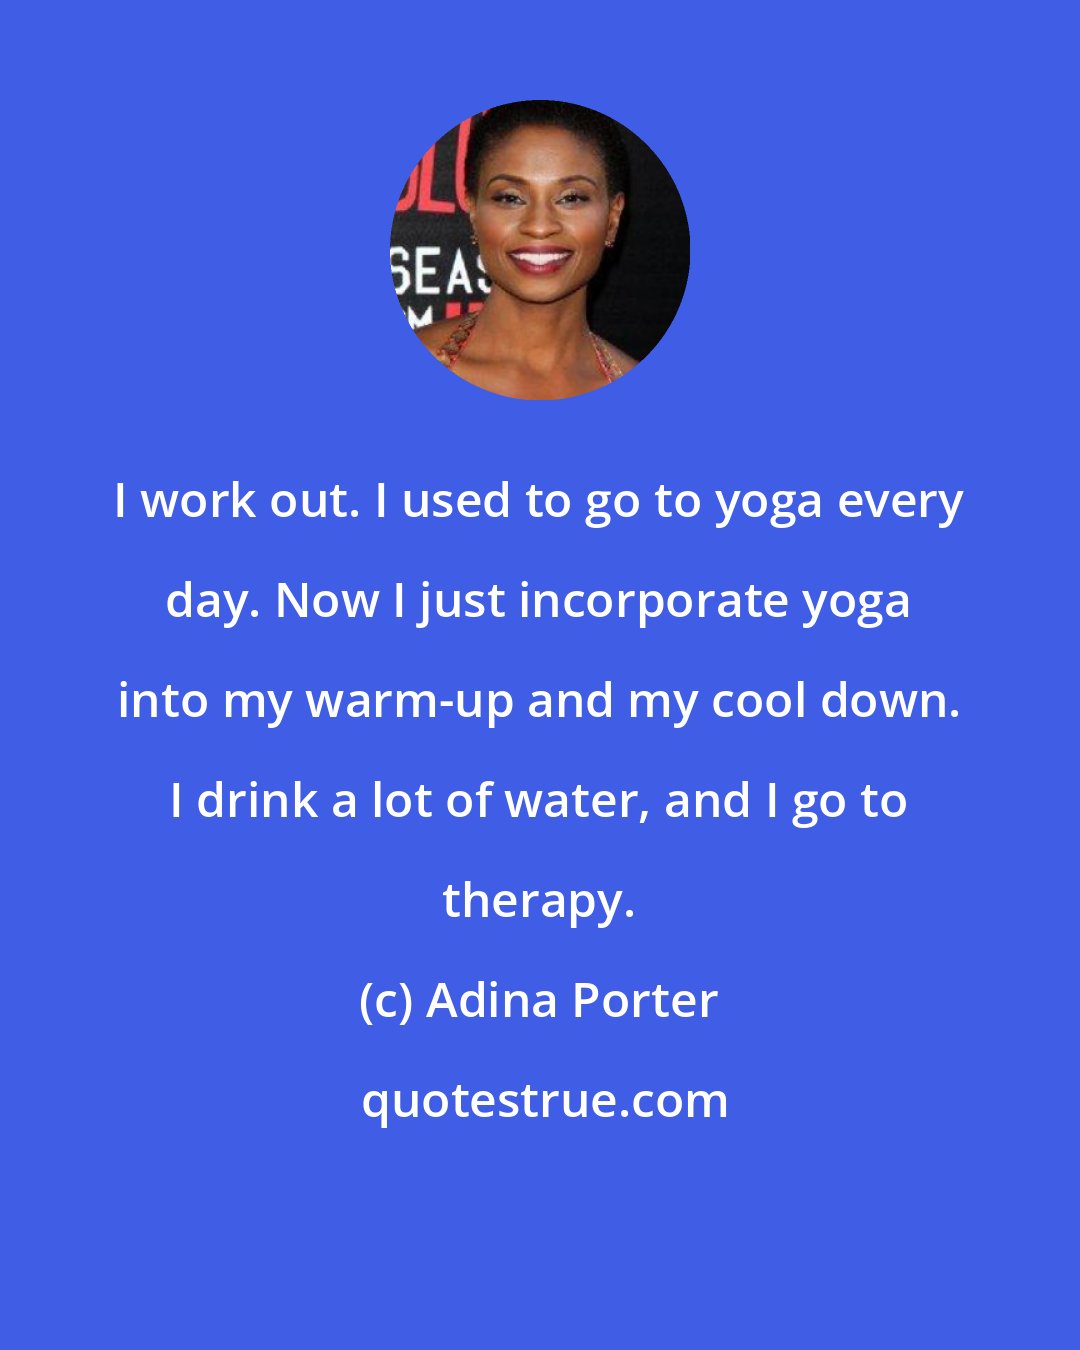 Adina Porter: I work out. I used to go to yoga every day. Now I just incorporate yoga into my warm-up and my cool down. I drink a lot of water, and I go to therapy.